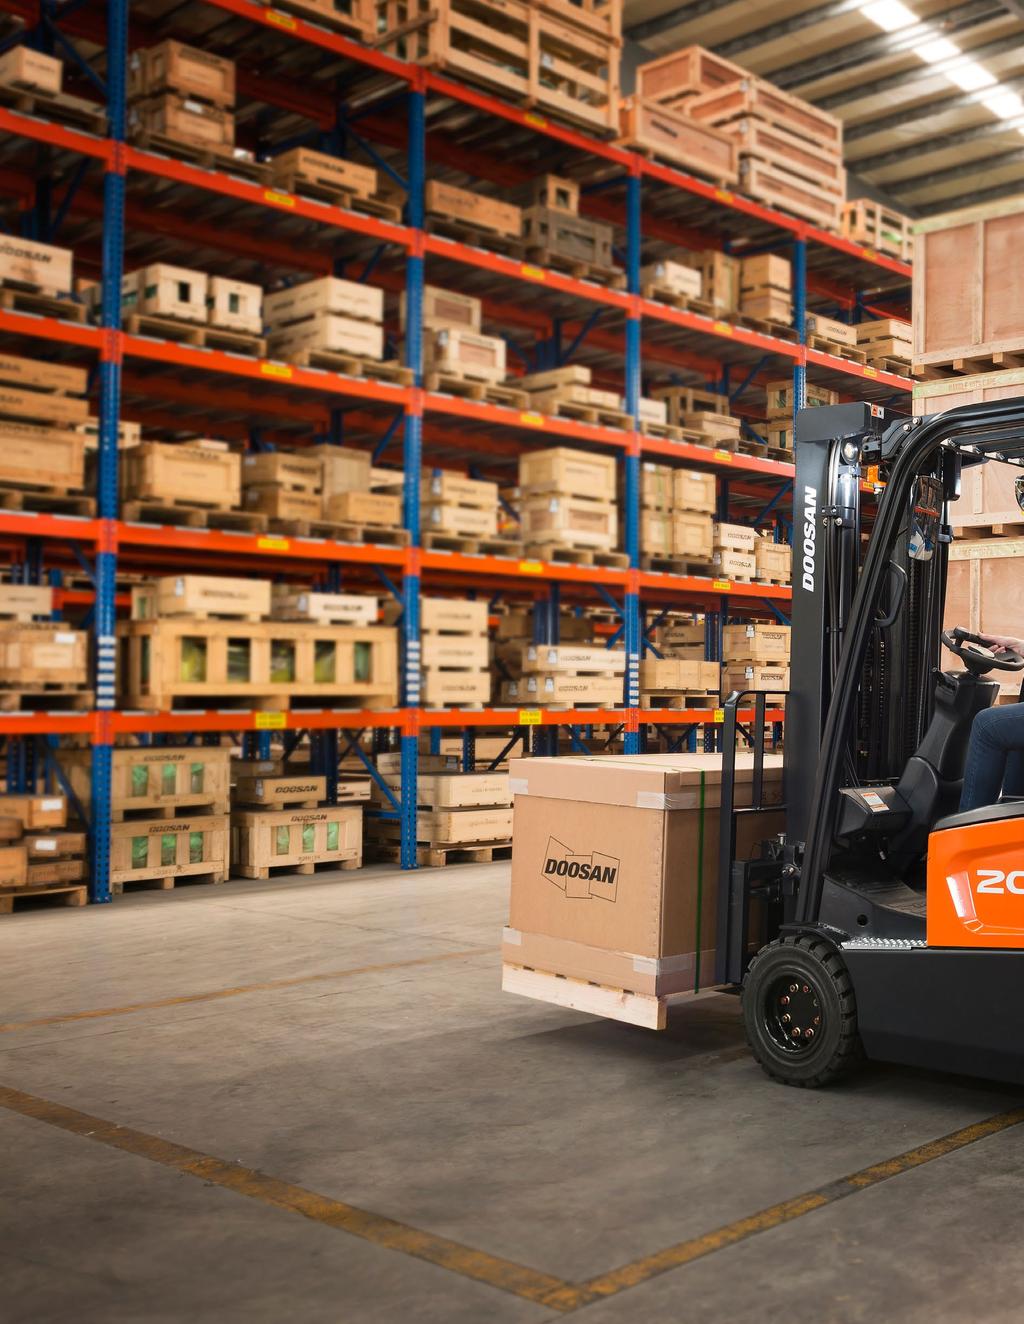 Doosan's All-new 7 Series Electric Forklifts Our 7 Series 3 wheel and 4 wheel electric counter balance forklift trucks continue the Doosan tradition of delivering simple, powerful performance, at the